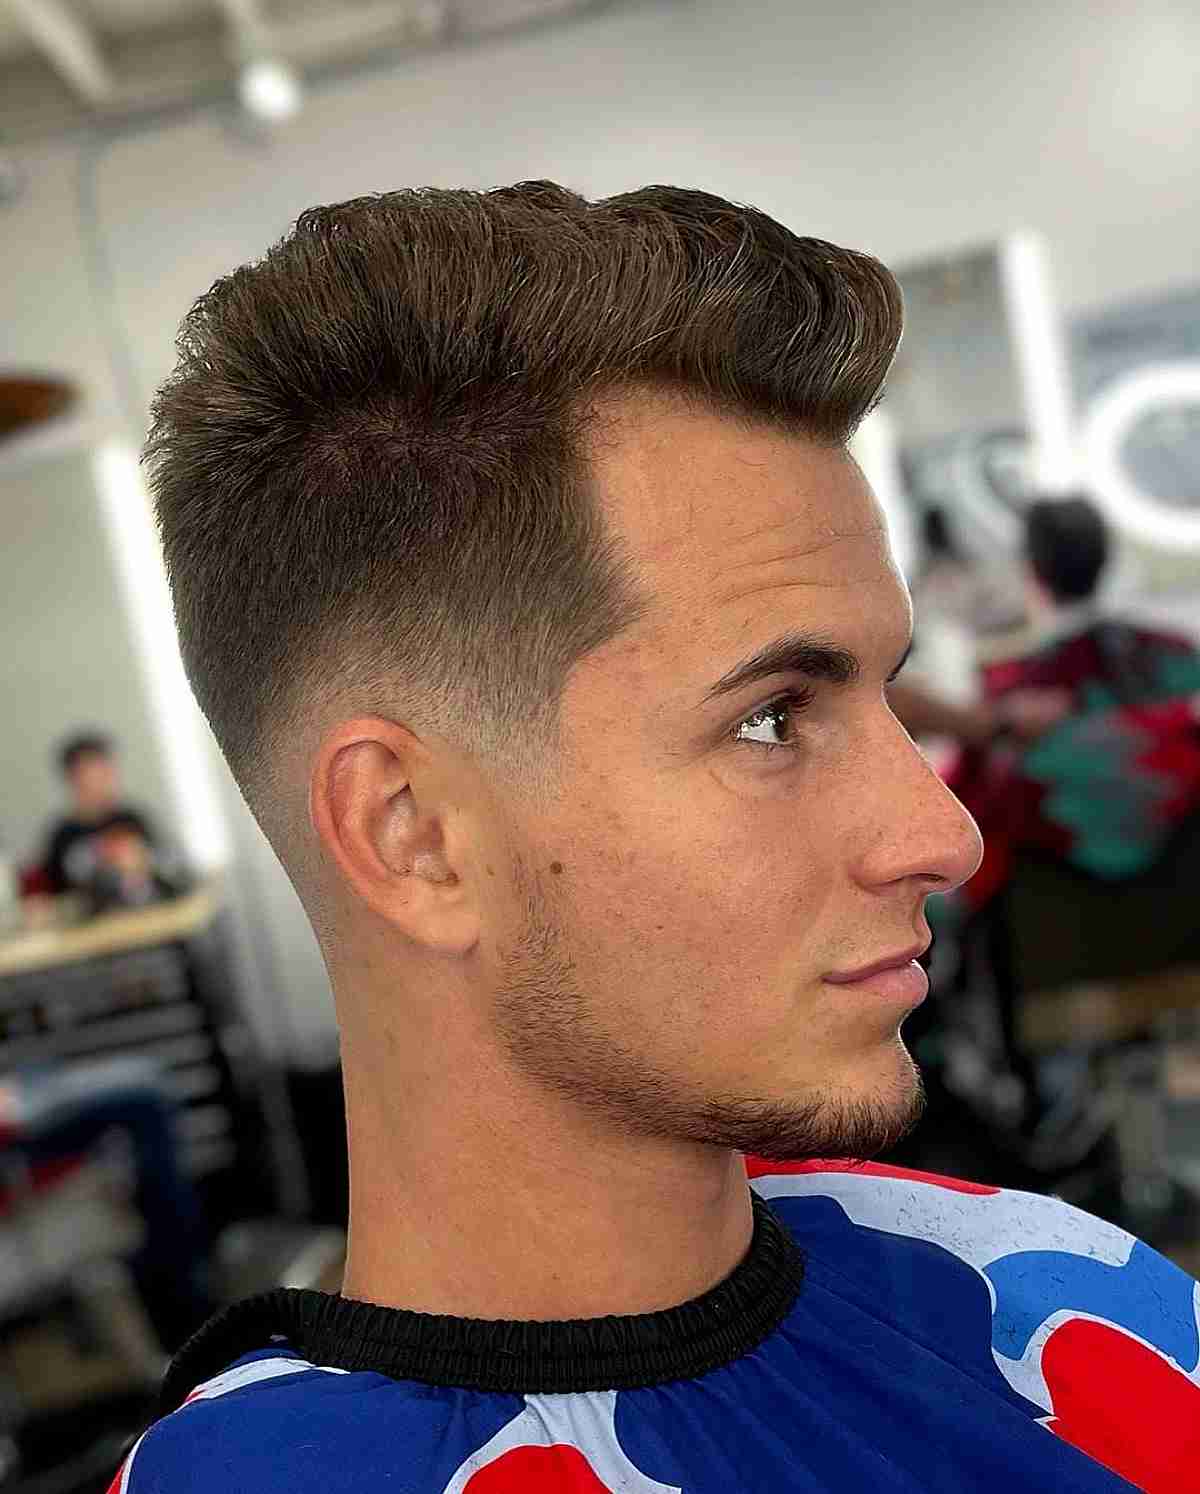 HairCuts Ideas to Choose in 2023